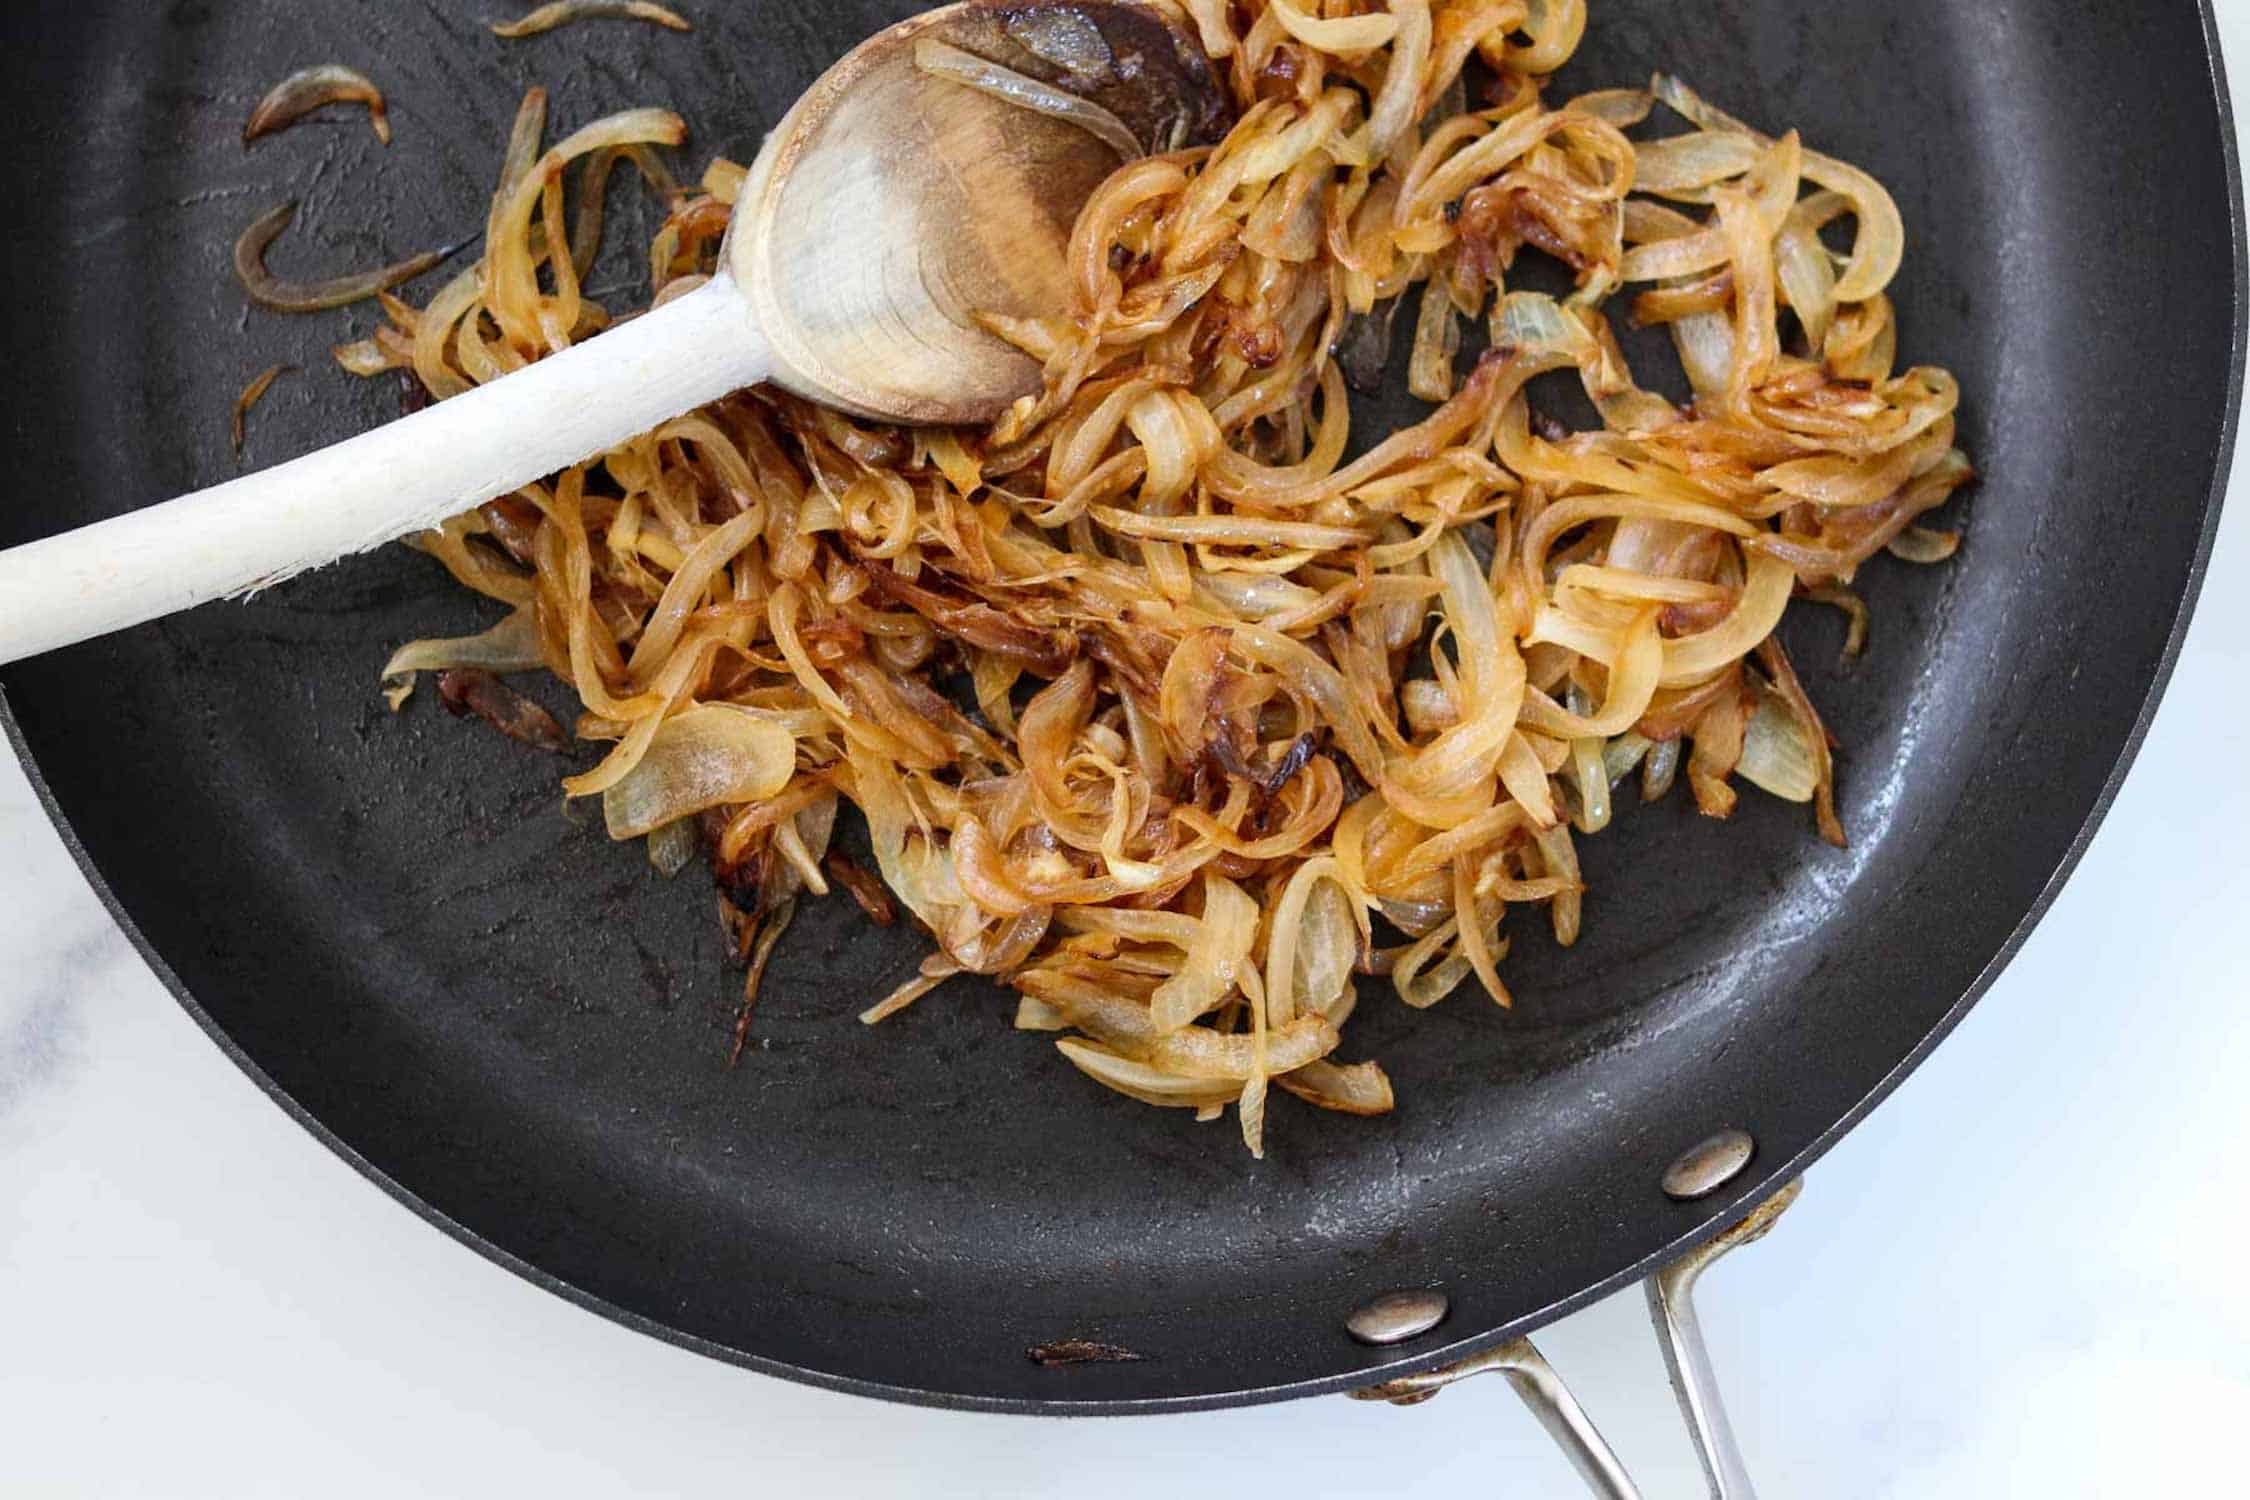 Caramelized onions in a pan with a wooden spoon.